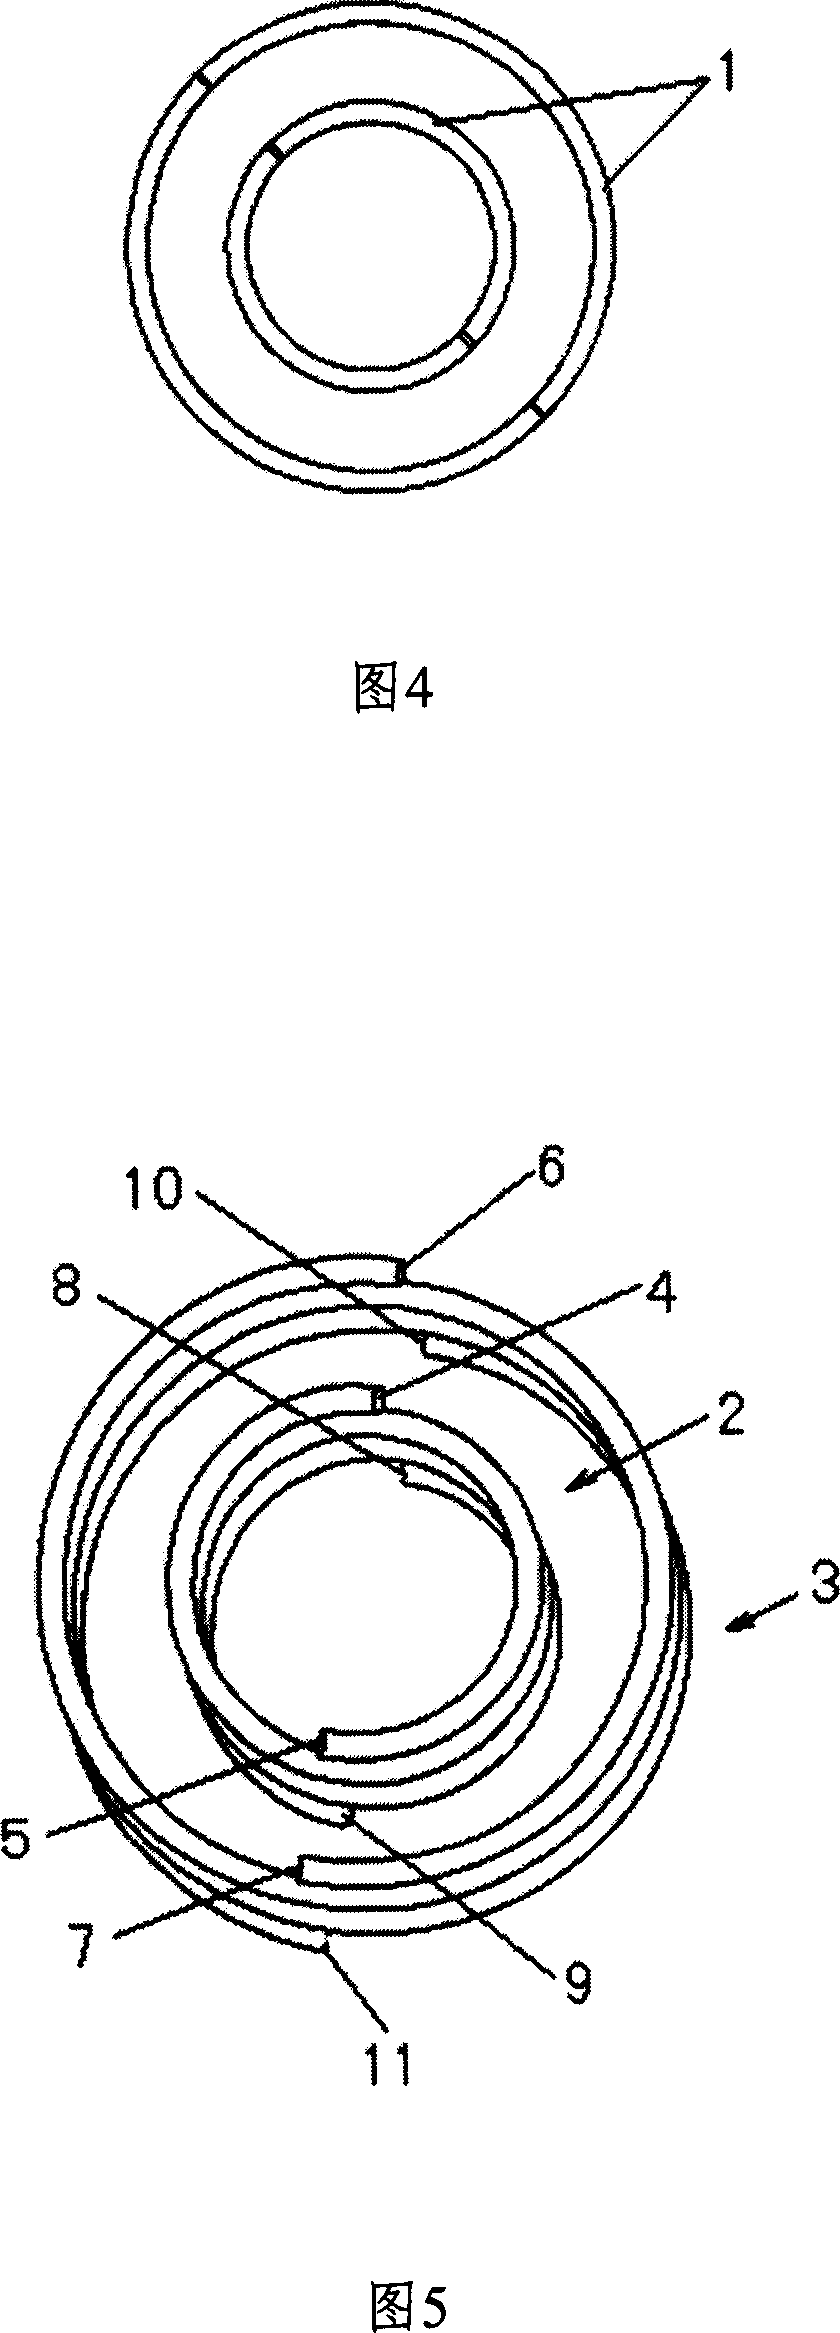 Inductive coupling source